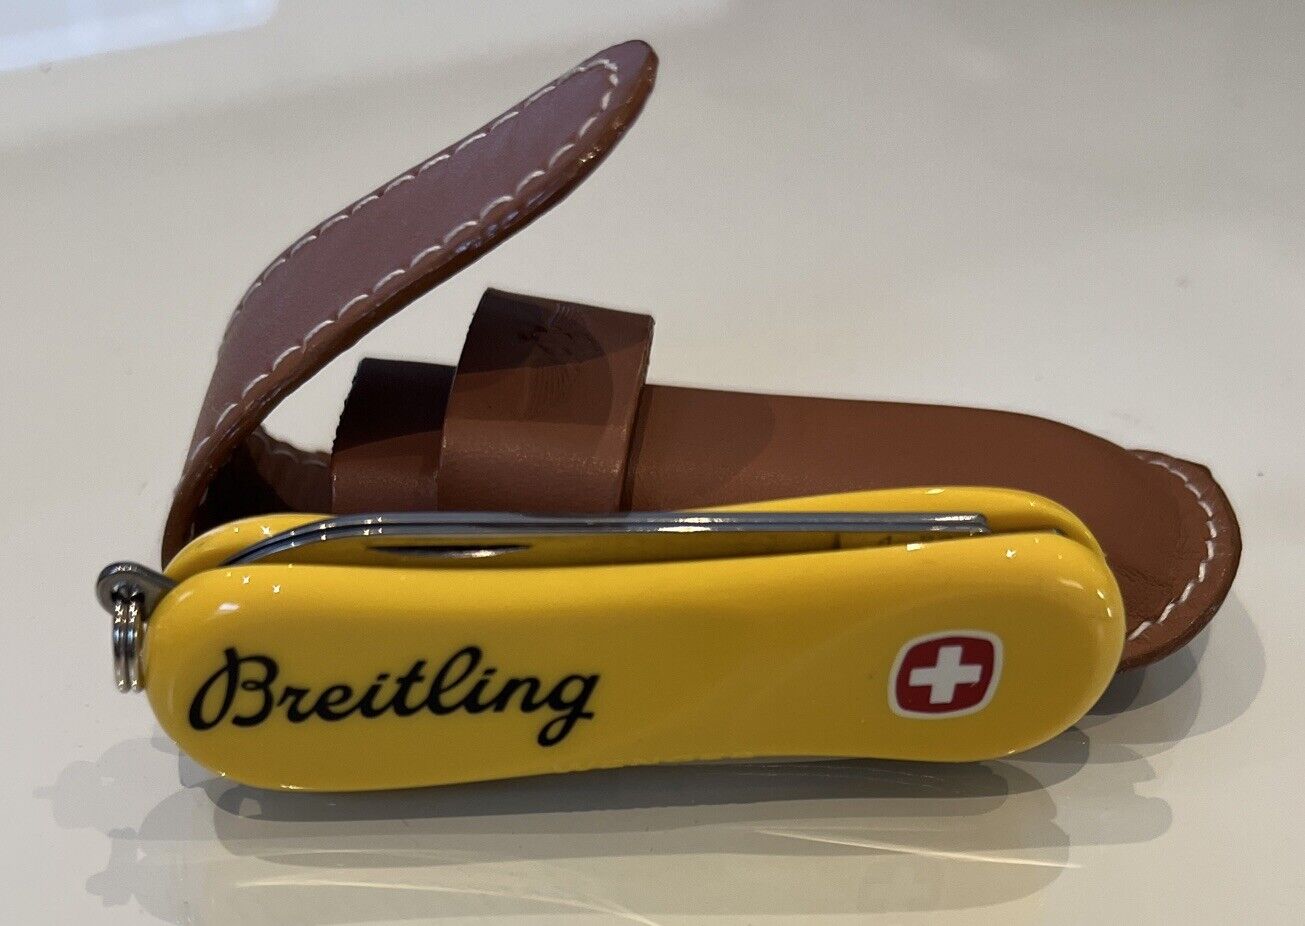 Breitling Watch Pocket Knife - Authentic Breitling - WENGER Swiss Army NEW